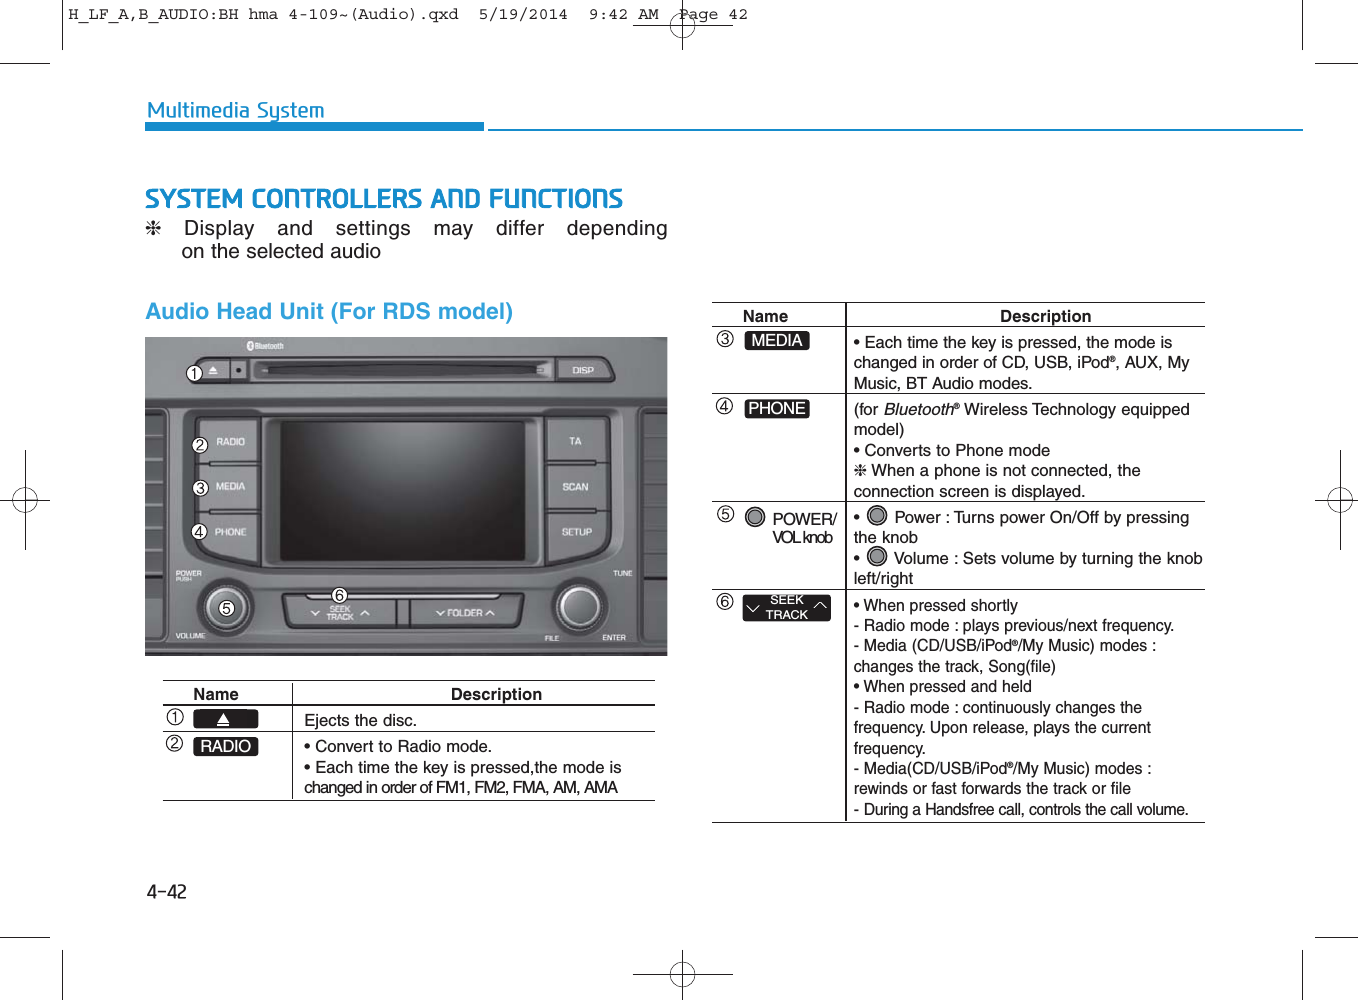 4-42Multimedia SystemSYSTEM CONTROLLERS AND FUNCTIONS❈Display and settings may differ depending on the selected audioAudio Head Unit (For RDS model)Name DescriptionEjects the disc.• Convert to Radio mode.• Each time the key is pressed,the mode is changed in order of FM1, FM2, FMA, AM, AMARADIOName Description• Each time the key is pressed, the mode is changed in order of CD, USB, iPod®, AUX, My Music, BT Audio modes.(for Bluetooth®Wireless Technology equippedmodel)• Converts to Phone mode❈When a phone is not connected, the connection screen is displayed.•  Power : Turns power On/Off by pressing the knob•  Volume : Sets volume by turning the knobleft/right• When pressed shortly - Radio mode : plays previous/next frequency.- Media (CD/USB/iPod®/My Music) modes : changes the track, Song(file)• When pressed and held- Radio mode : continuously changes thefrequency. Upon release, plays the current frequency.- Media(CD/USB/iPod®/My Music) modes : rewinds or fast forwards the track or file- During a Handsfree call, controls the call volume.POWER/ VOL knobSEEKTRACKMEDIAPHONEH_LF_A,B_AUDIO:BH hma 4-109~(Audio).qxd  5/19/2014  9:42 AM  Page 42